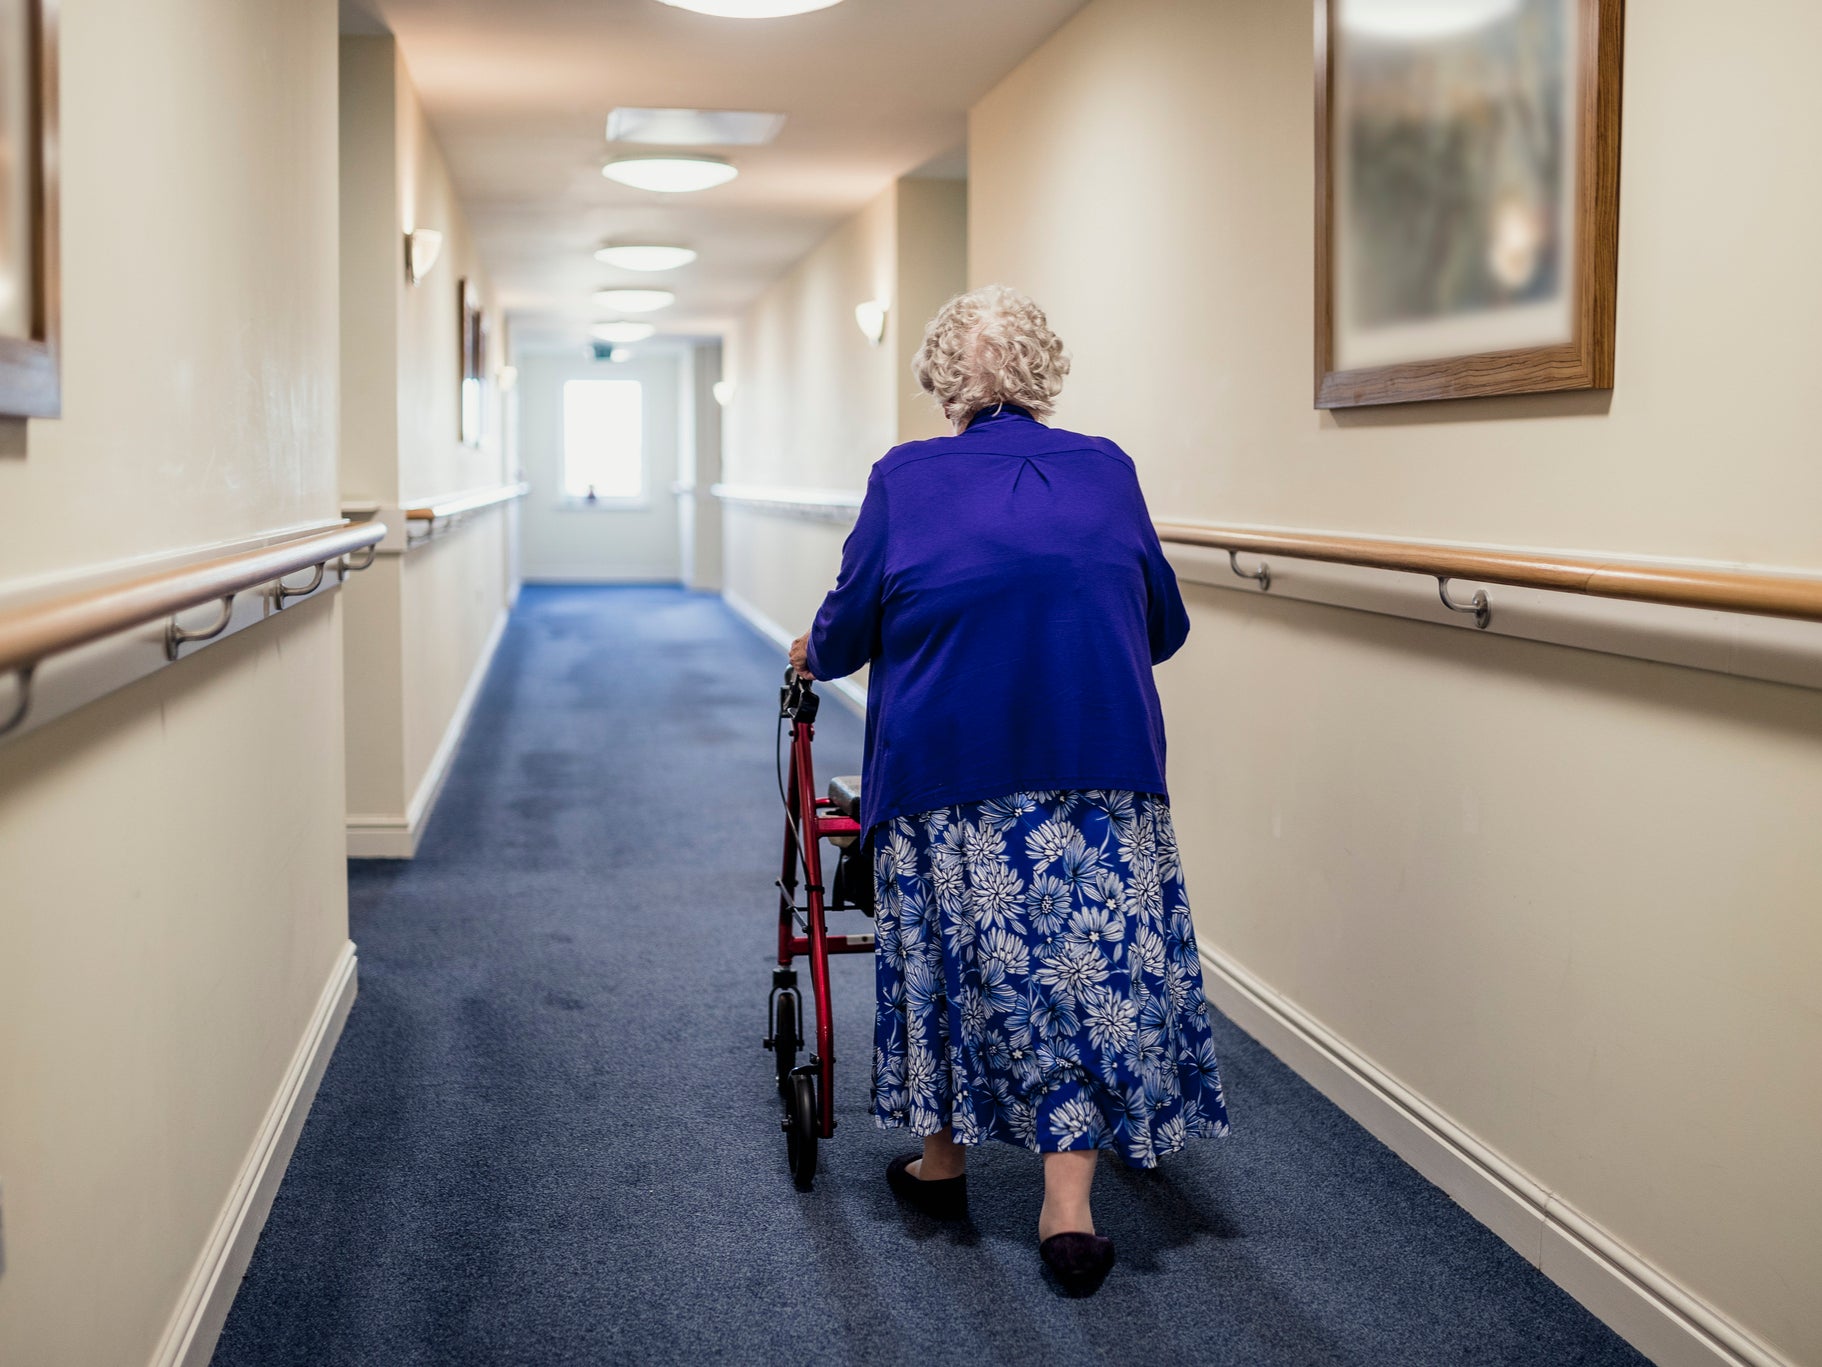 The CQC has prosecuted the owners of Curzon Hose care home near Chester after harm to an elderly resident in 2017